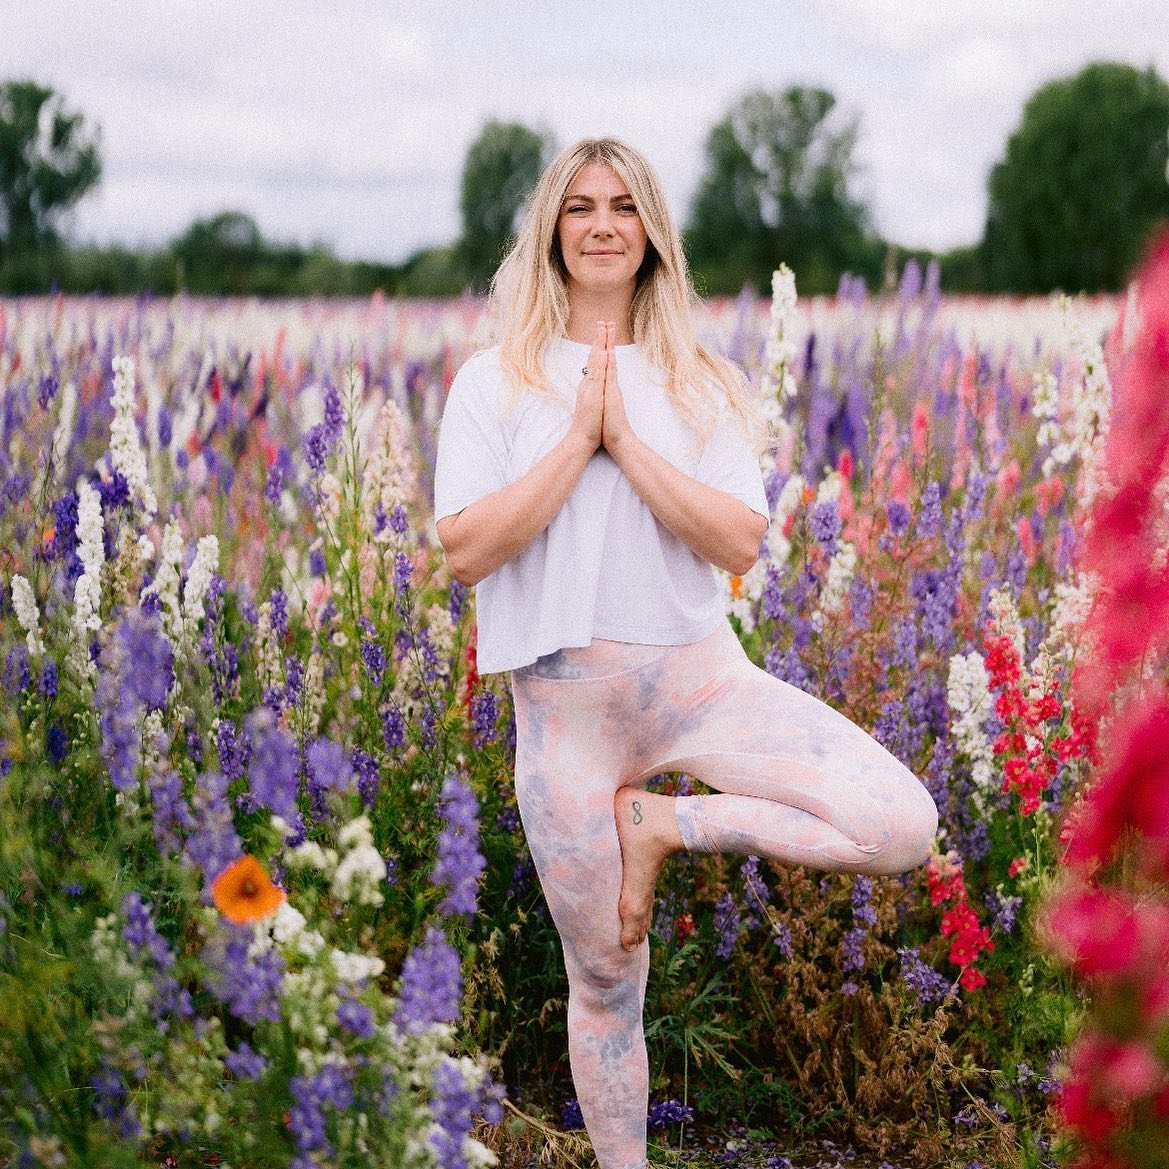 T E A C H E R  I N T R O

Introducing Nova Yoga teacher, Natalie 🤍

Natalie (or Nat) was first introduced to yoga as a teenager and qualified as a yoga teacher in 2016 in Rishikesh, India. 

Nat&rsquo;s focus is on guiding you to connect back to you